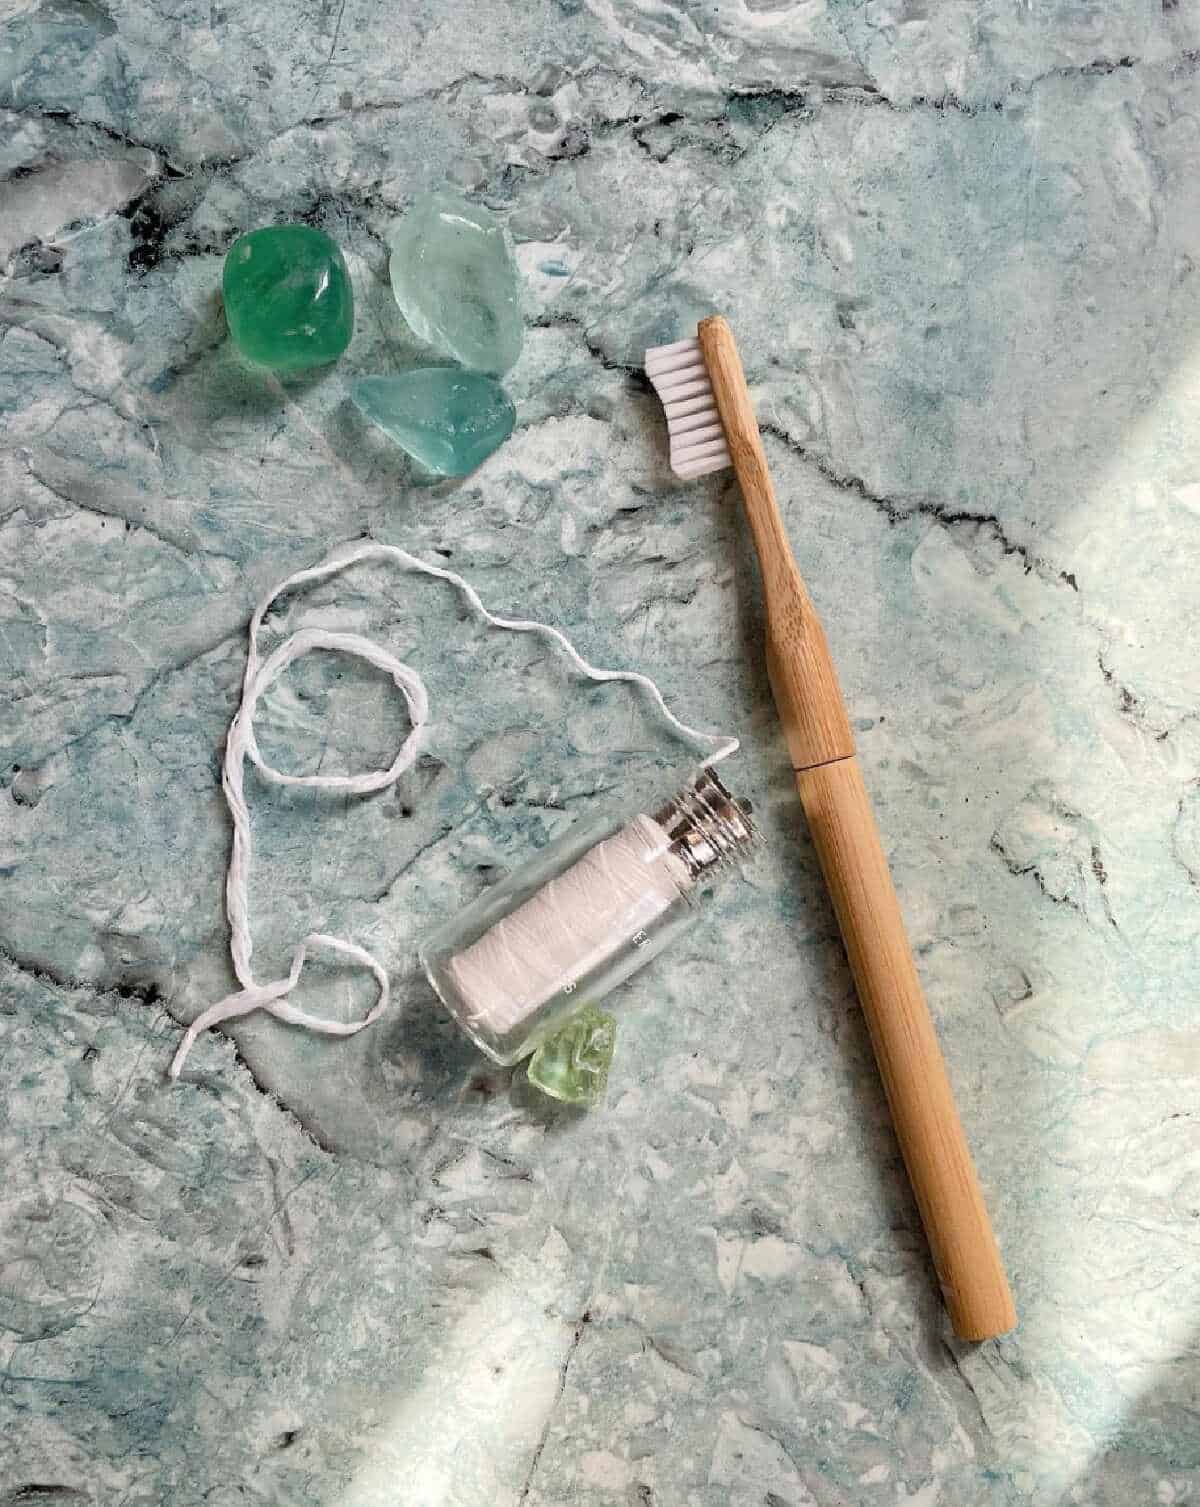 A small glass container full of vegan-friendly floss on a light green marble background and next to a bamboo toothbrush.